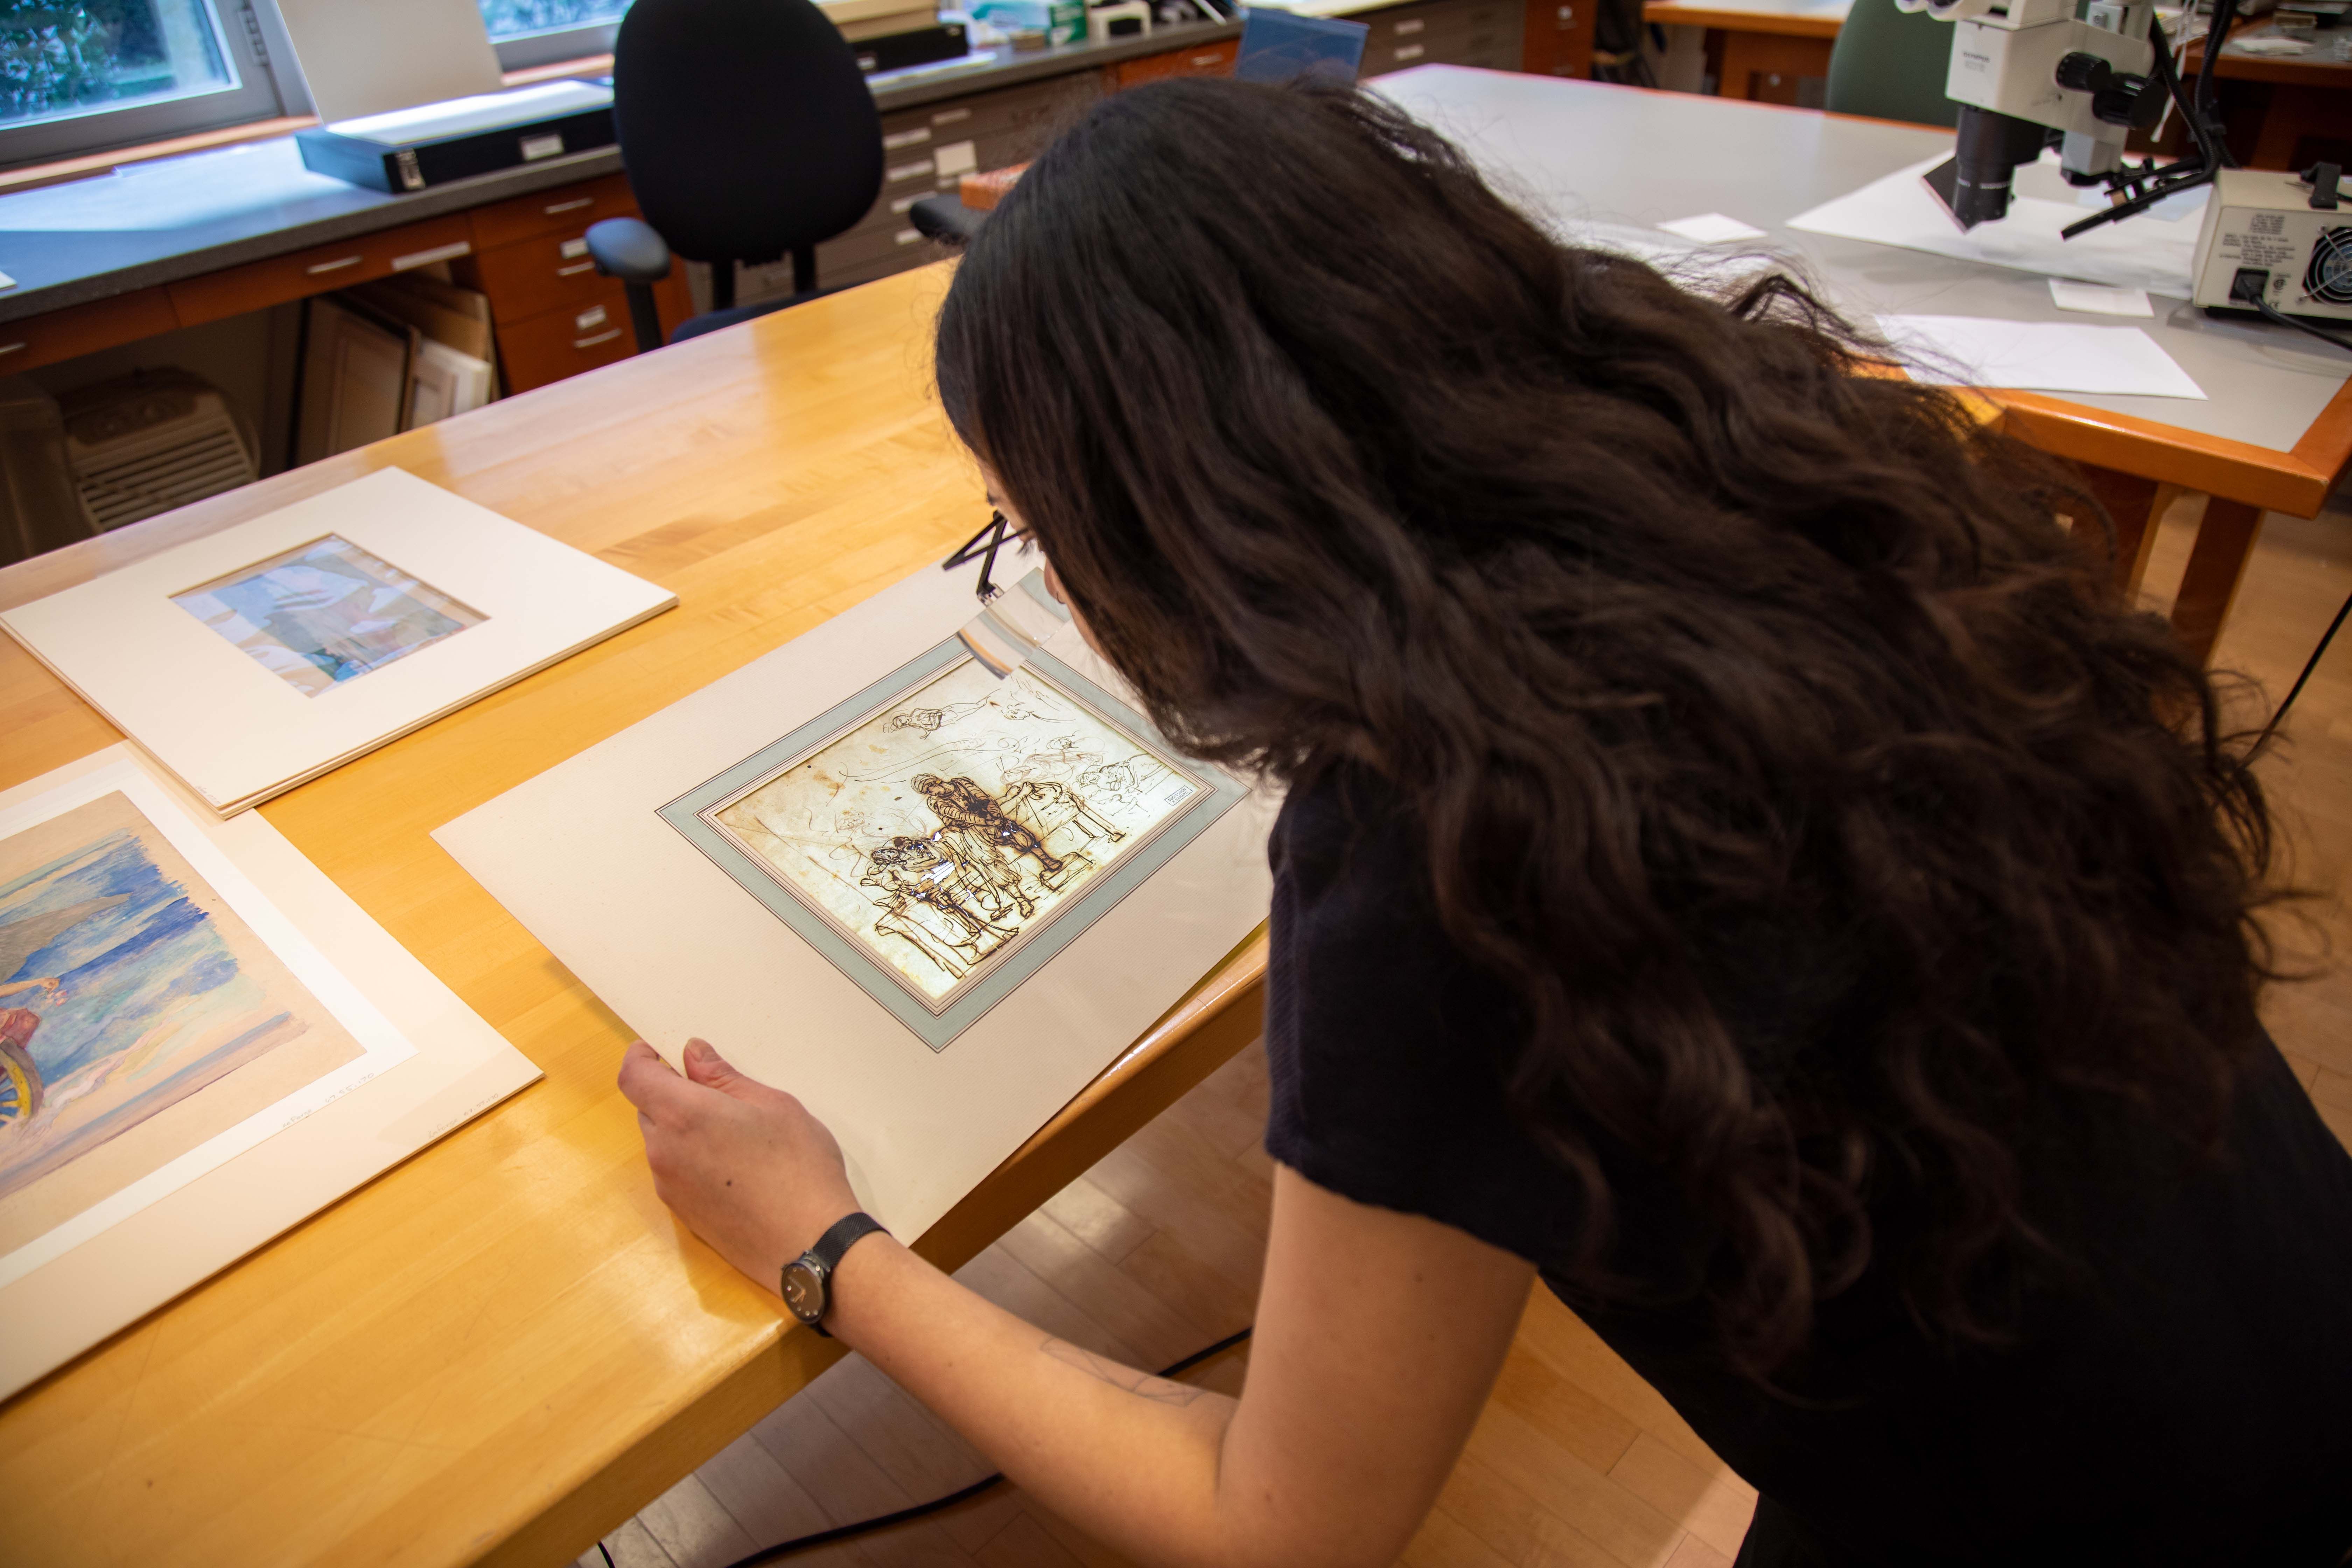 Loike pictured from behind in the paper conservation lab at the met studying a drawing.